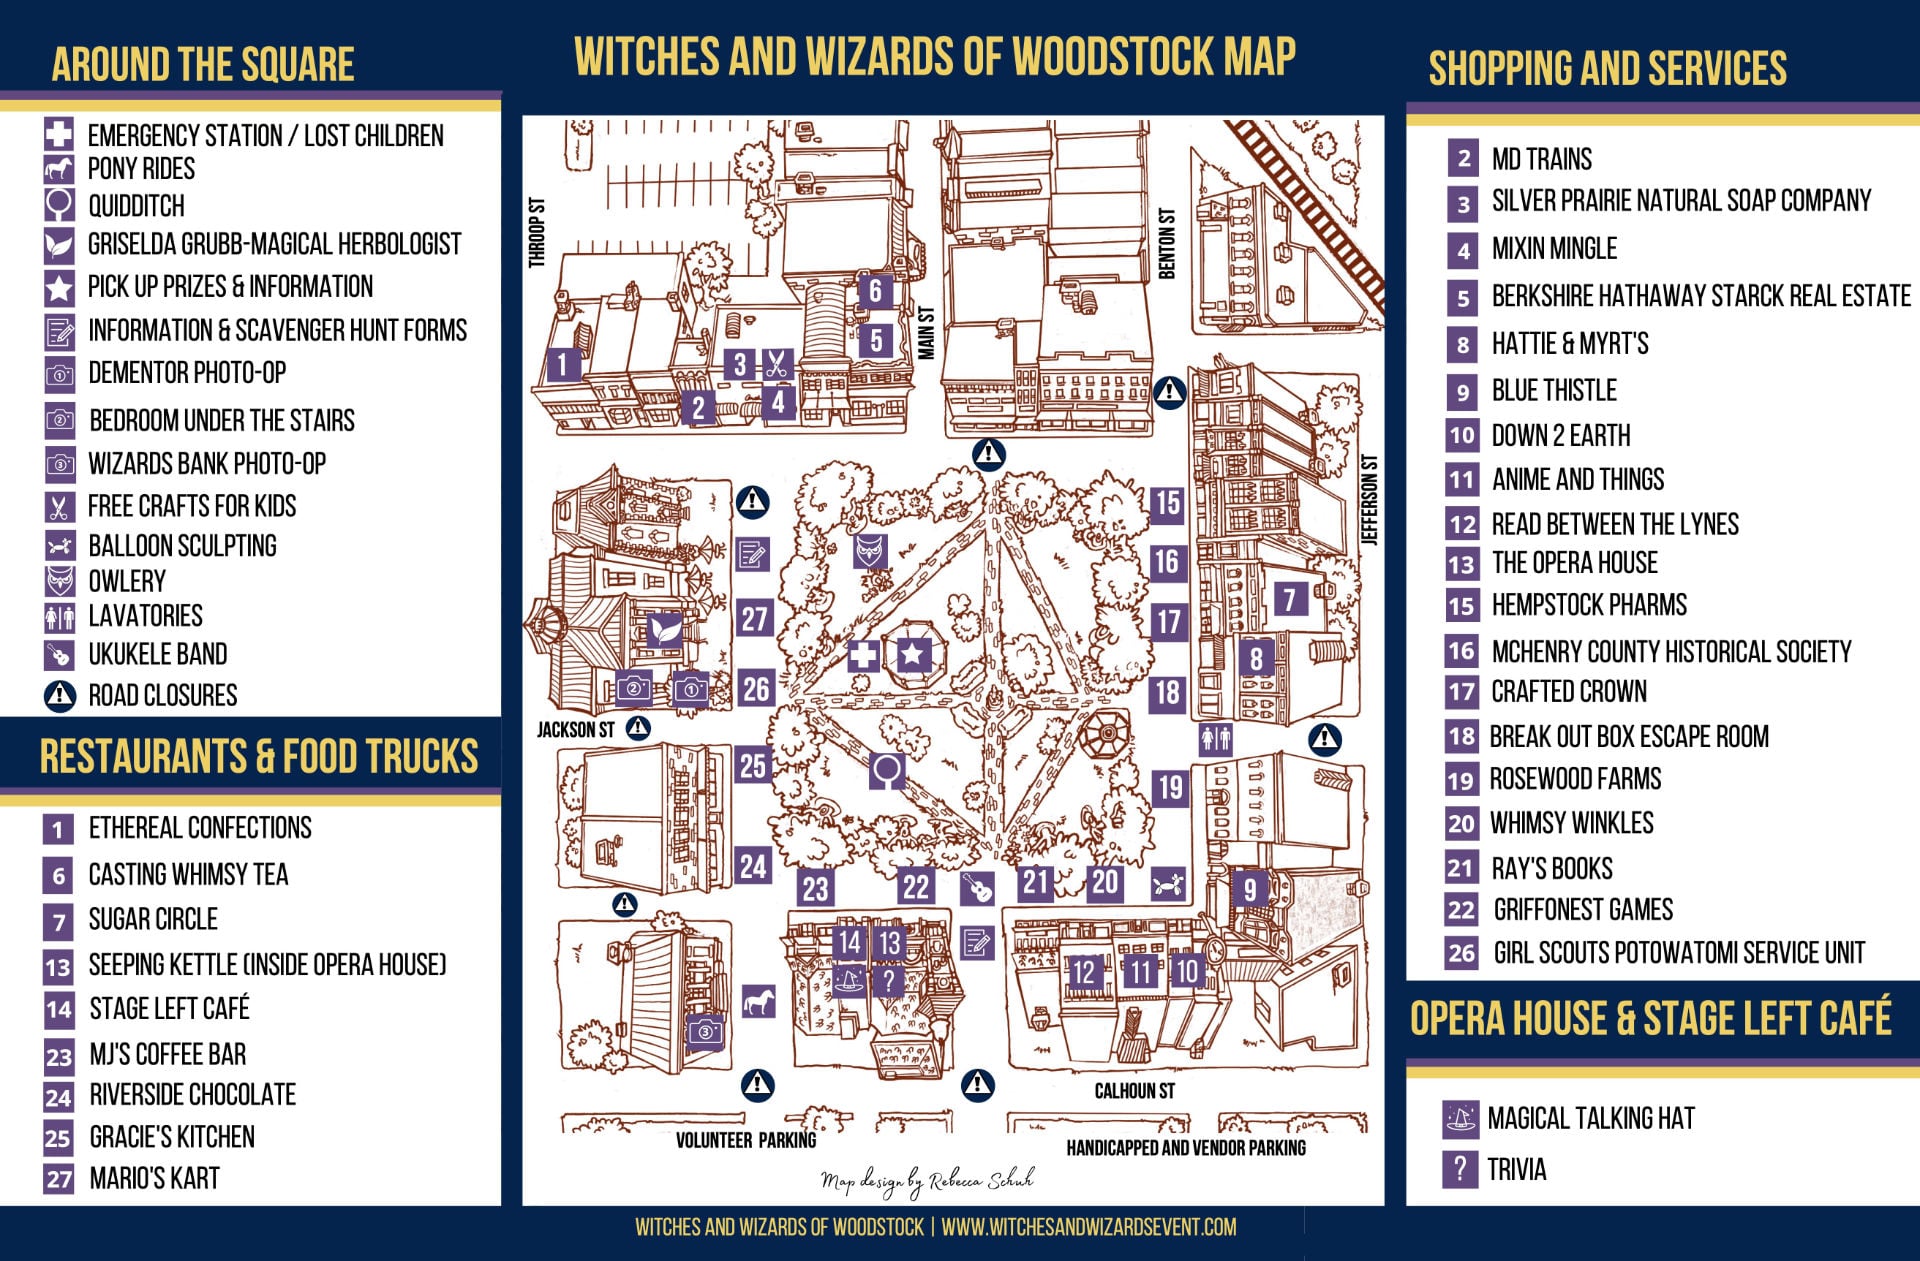 Witches and Wizards of Woodstock Map